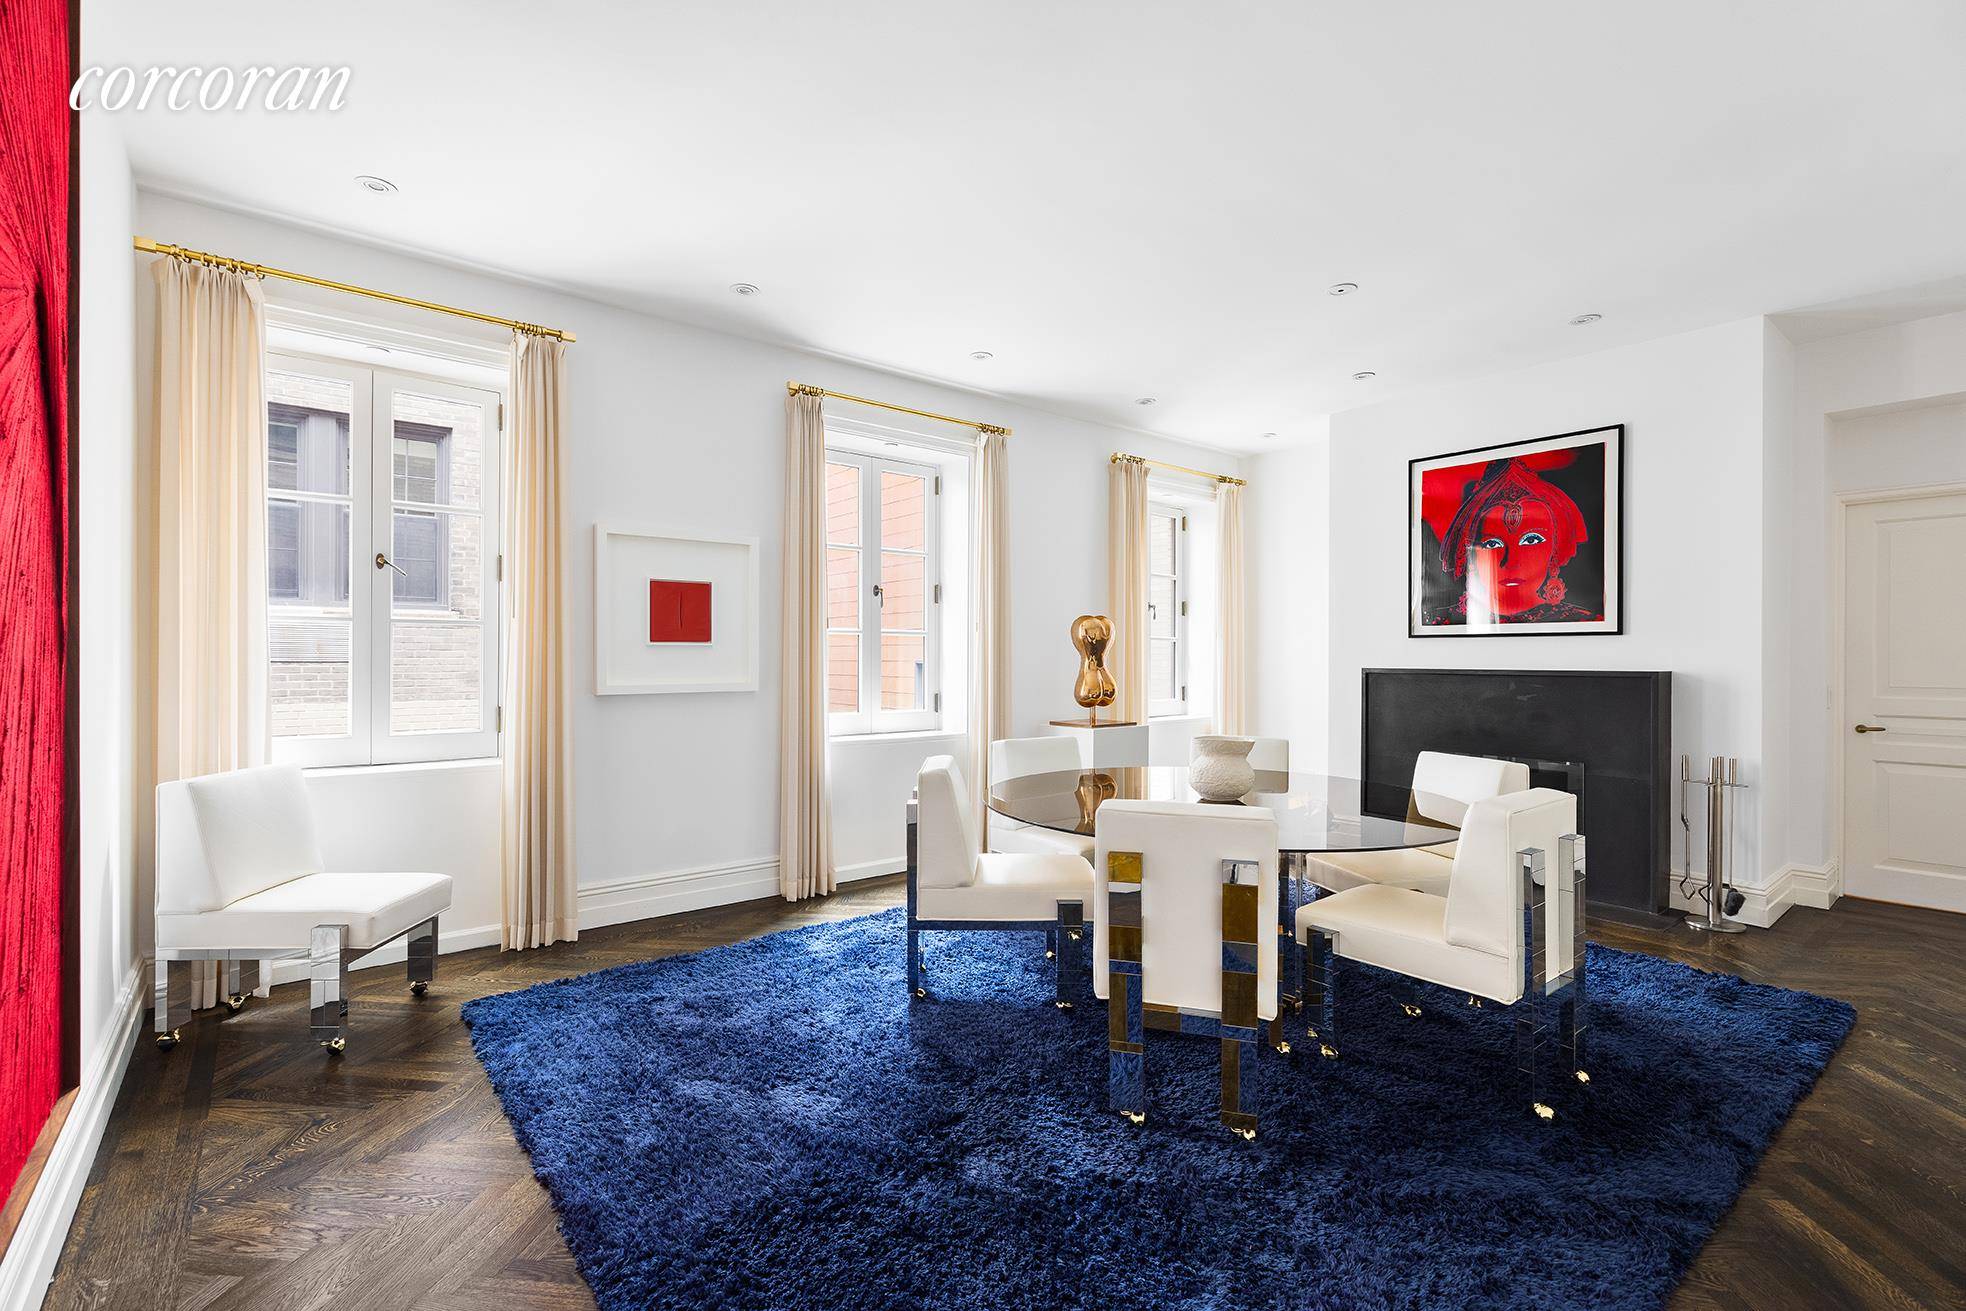 3 East 95th Street 5 Bedrooms 4 Full Baths 3 Powder Rooms 7, 190 sqft Interior and 5, 290 sqft Private Outdoor Space The Penthouse at the Carhart Mansion is ...